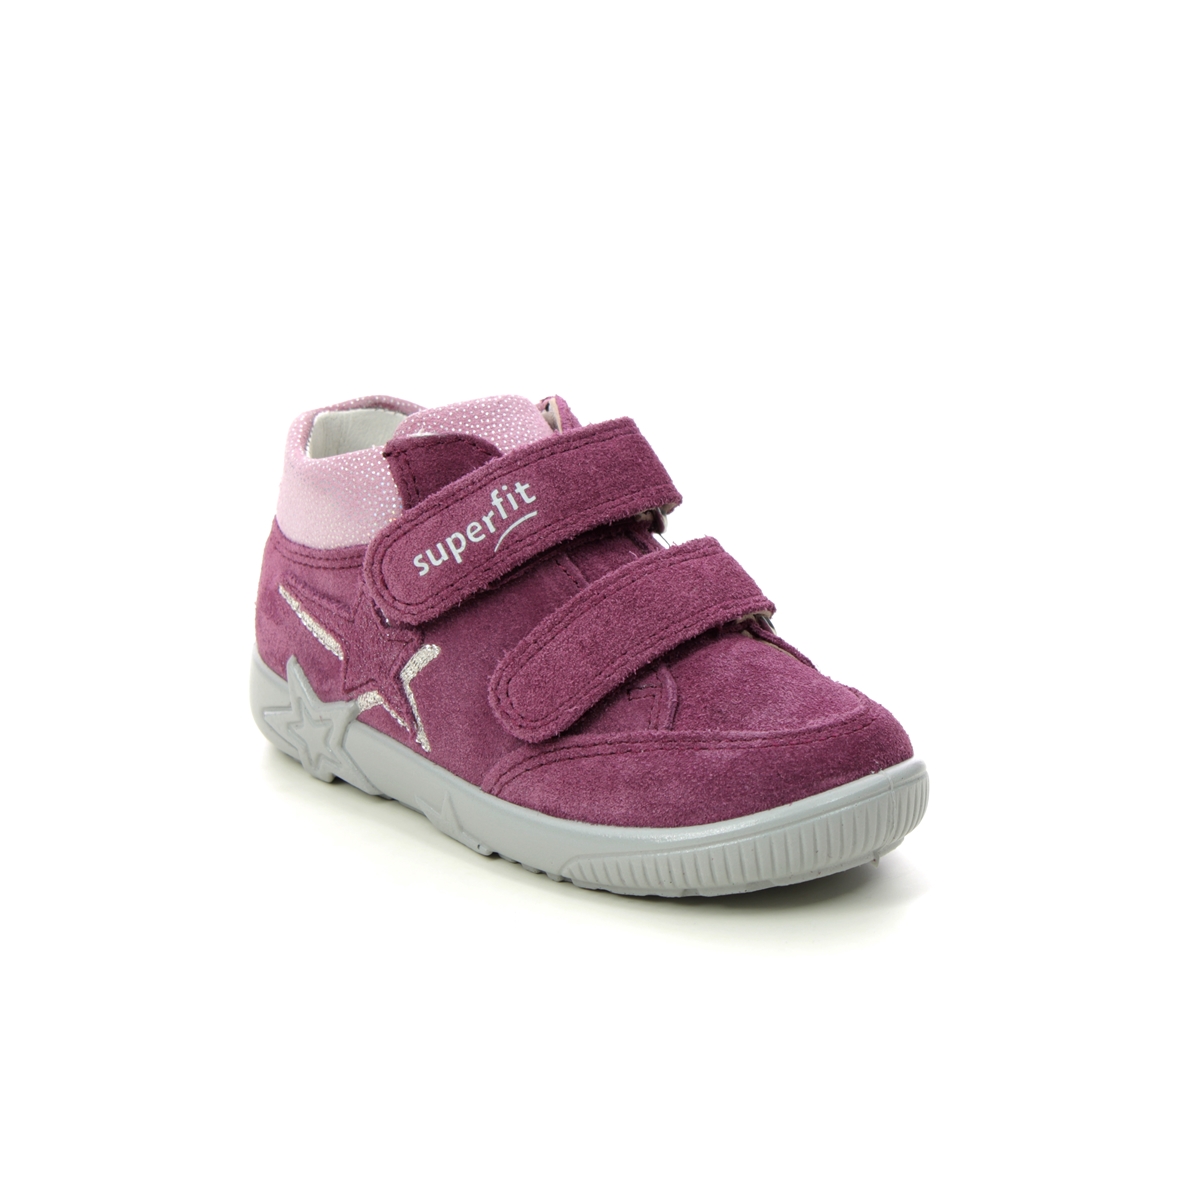 Superfit Starlight Ht 2v Pink suede Kids first shoes 1006443-5510 in a Plain Leather in Size 26